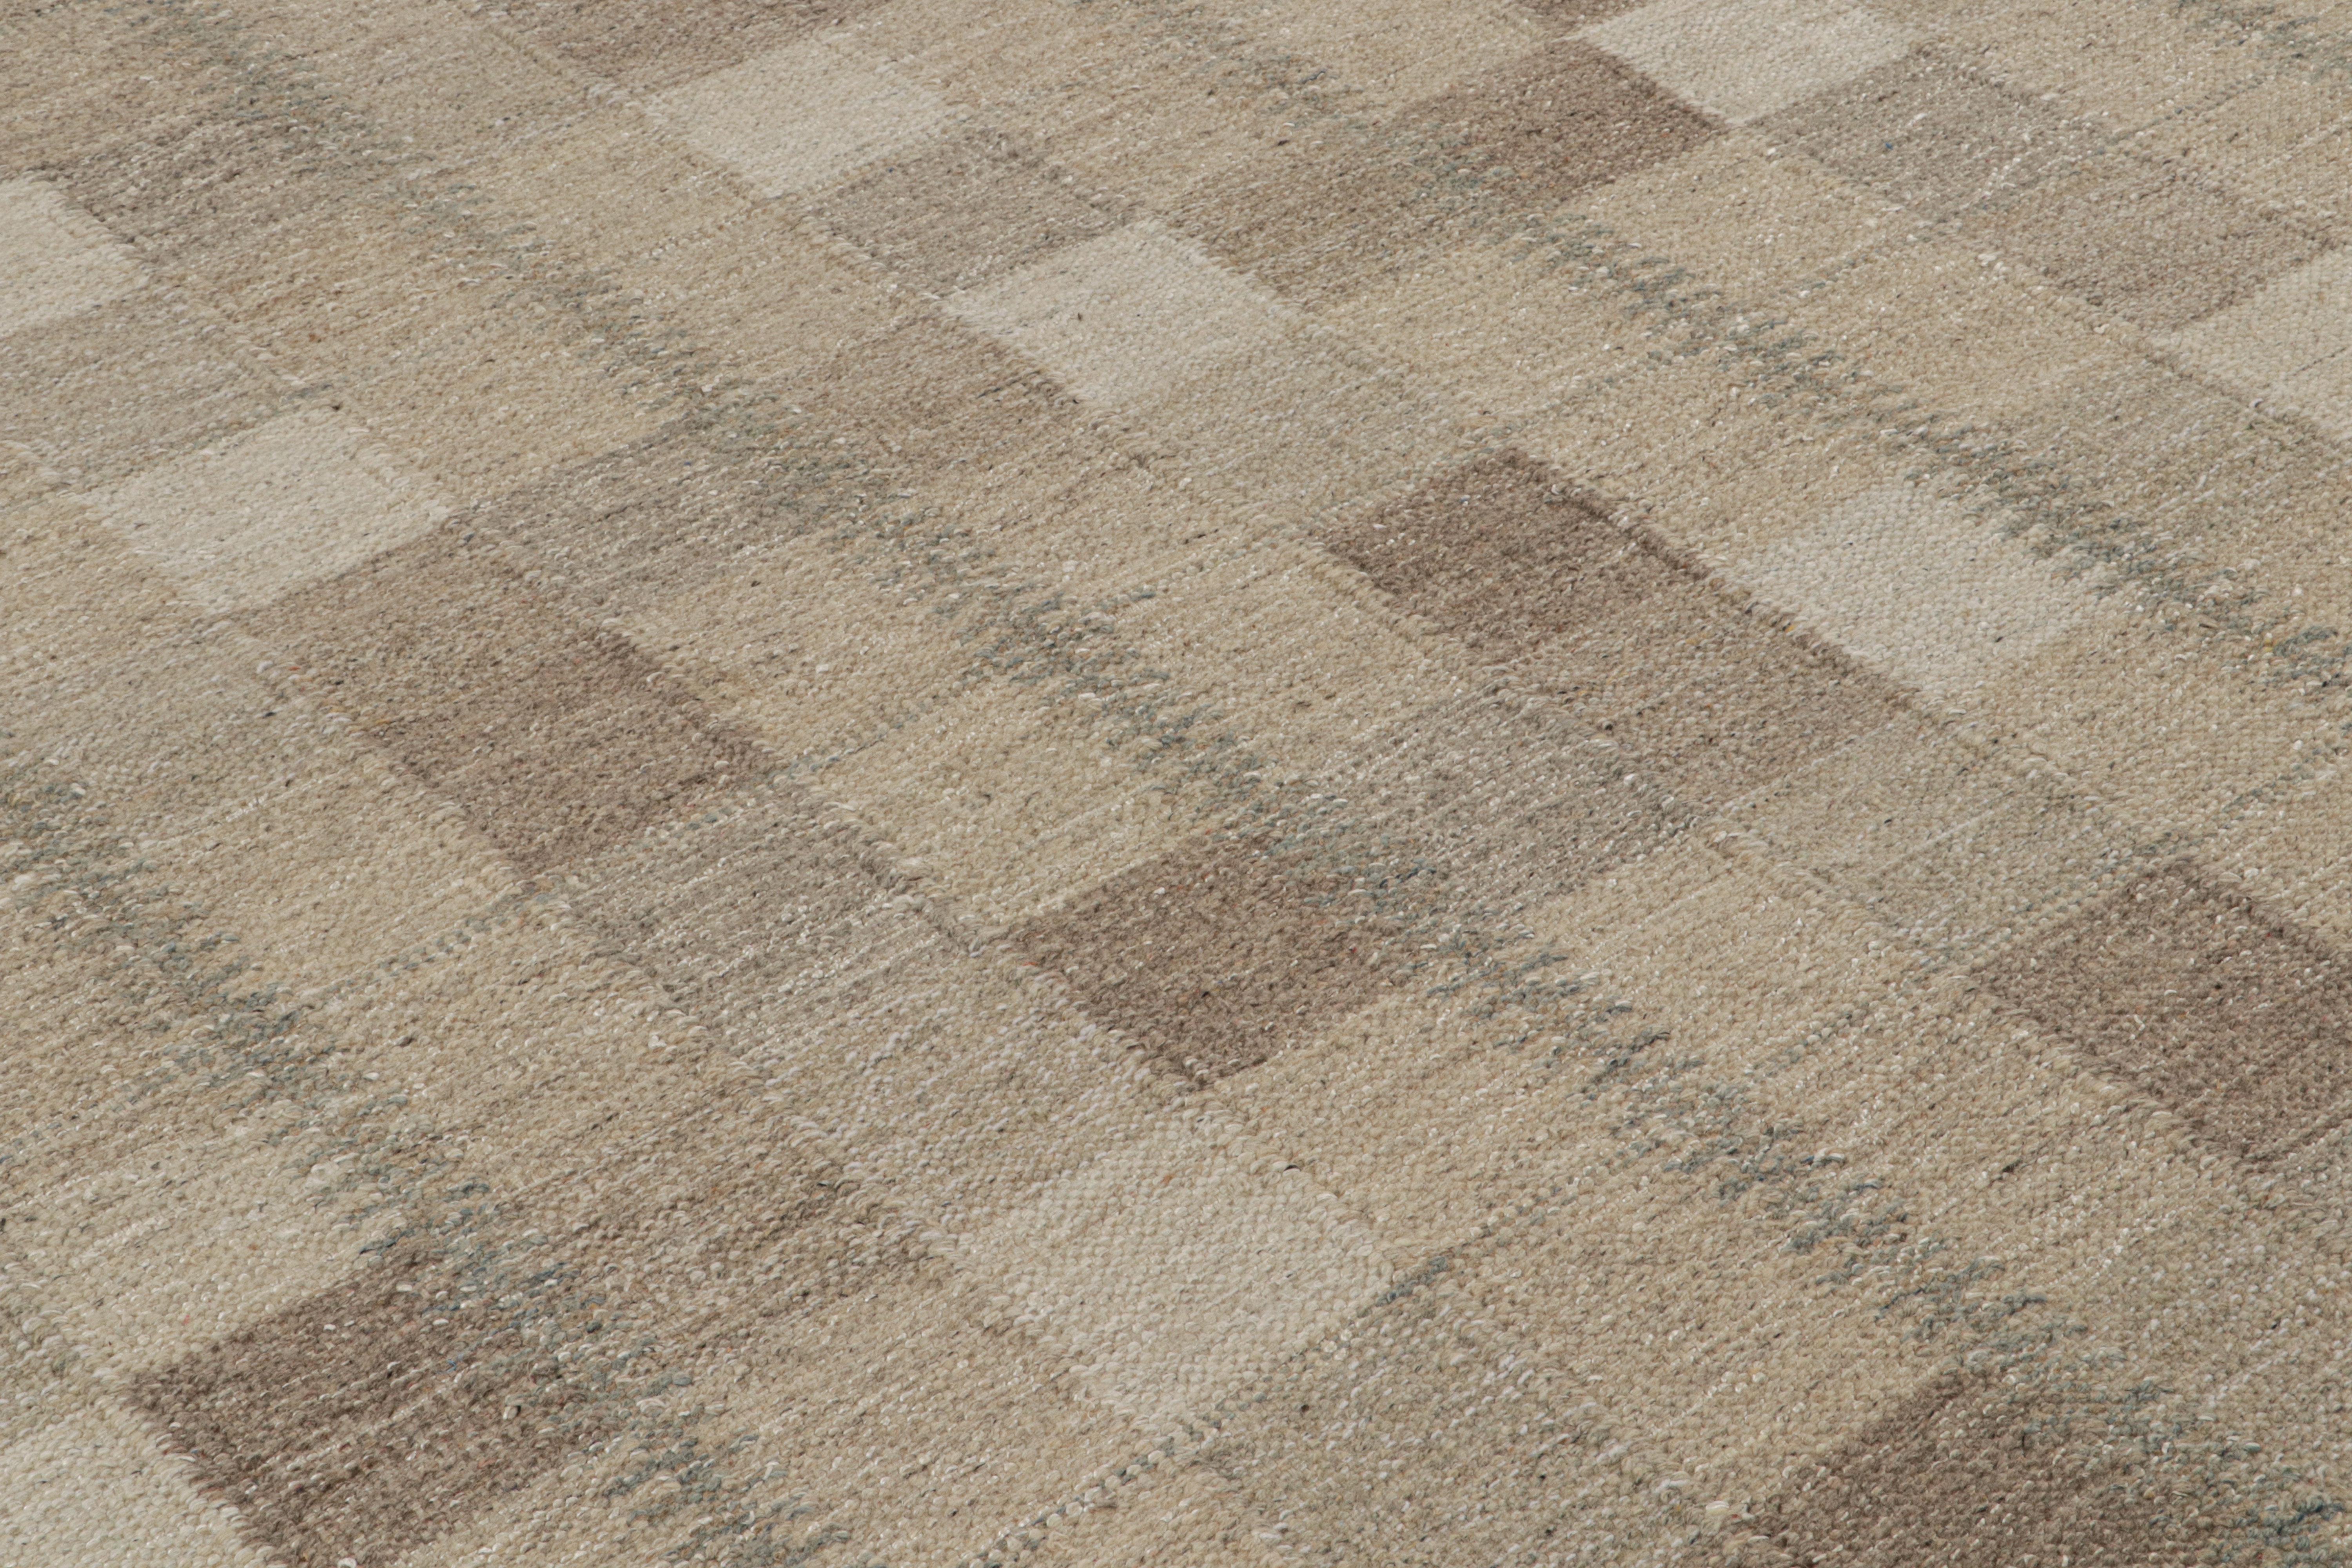 Hand-knotted in wool, this 18x31 Scandinavian palace rug features beige-brown and taupe tones in geometric patterns, namely a grid of squares and stripes inspired by the Swedish minimalist and deco sensibilities of this aesthetic. 

On the design: